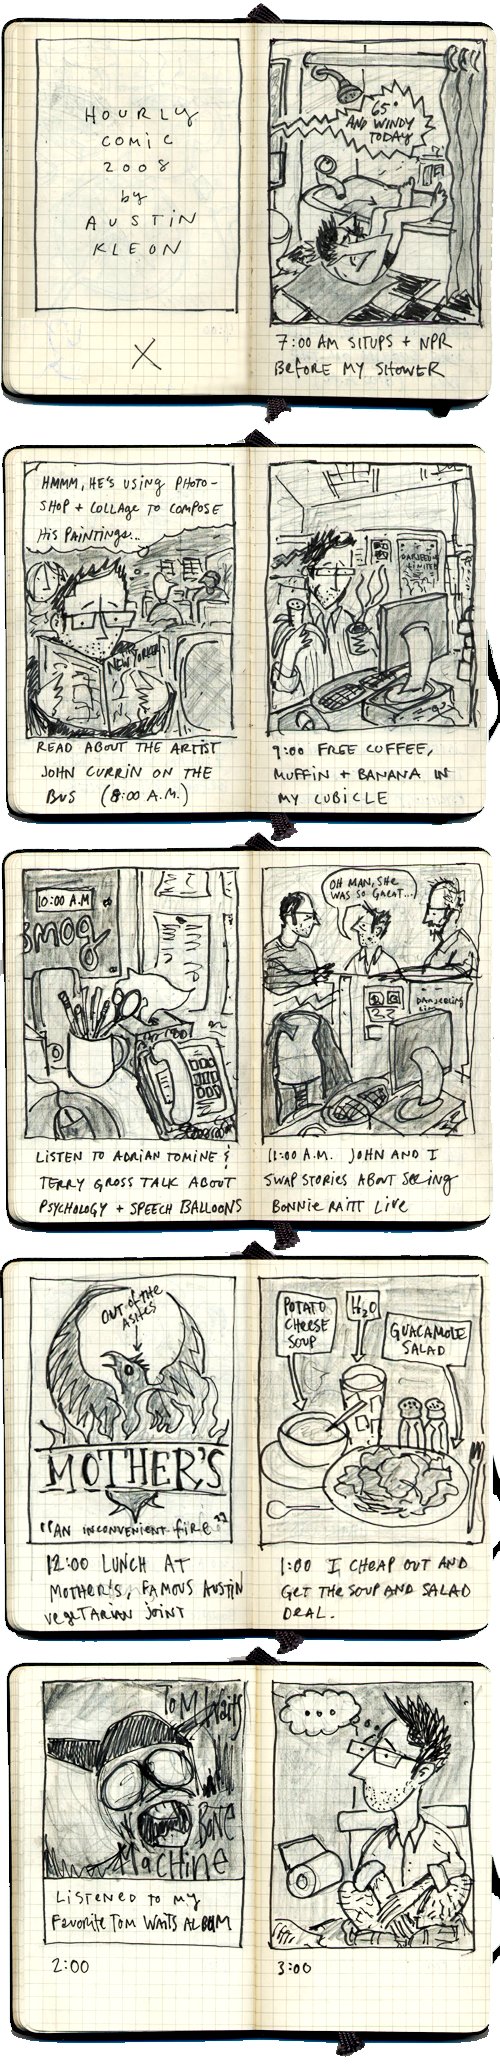 hourly comic 2008 (part one)